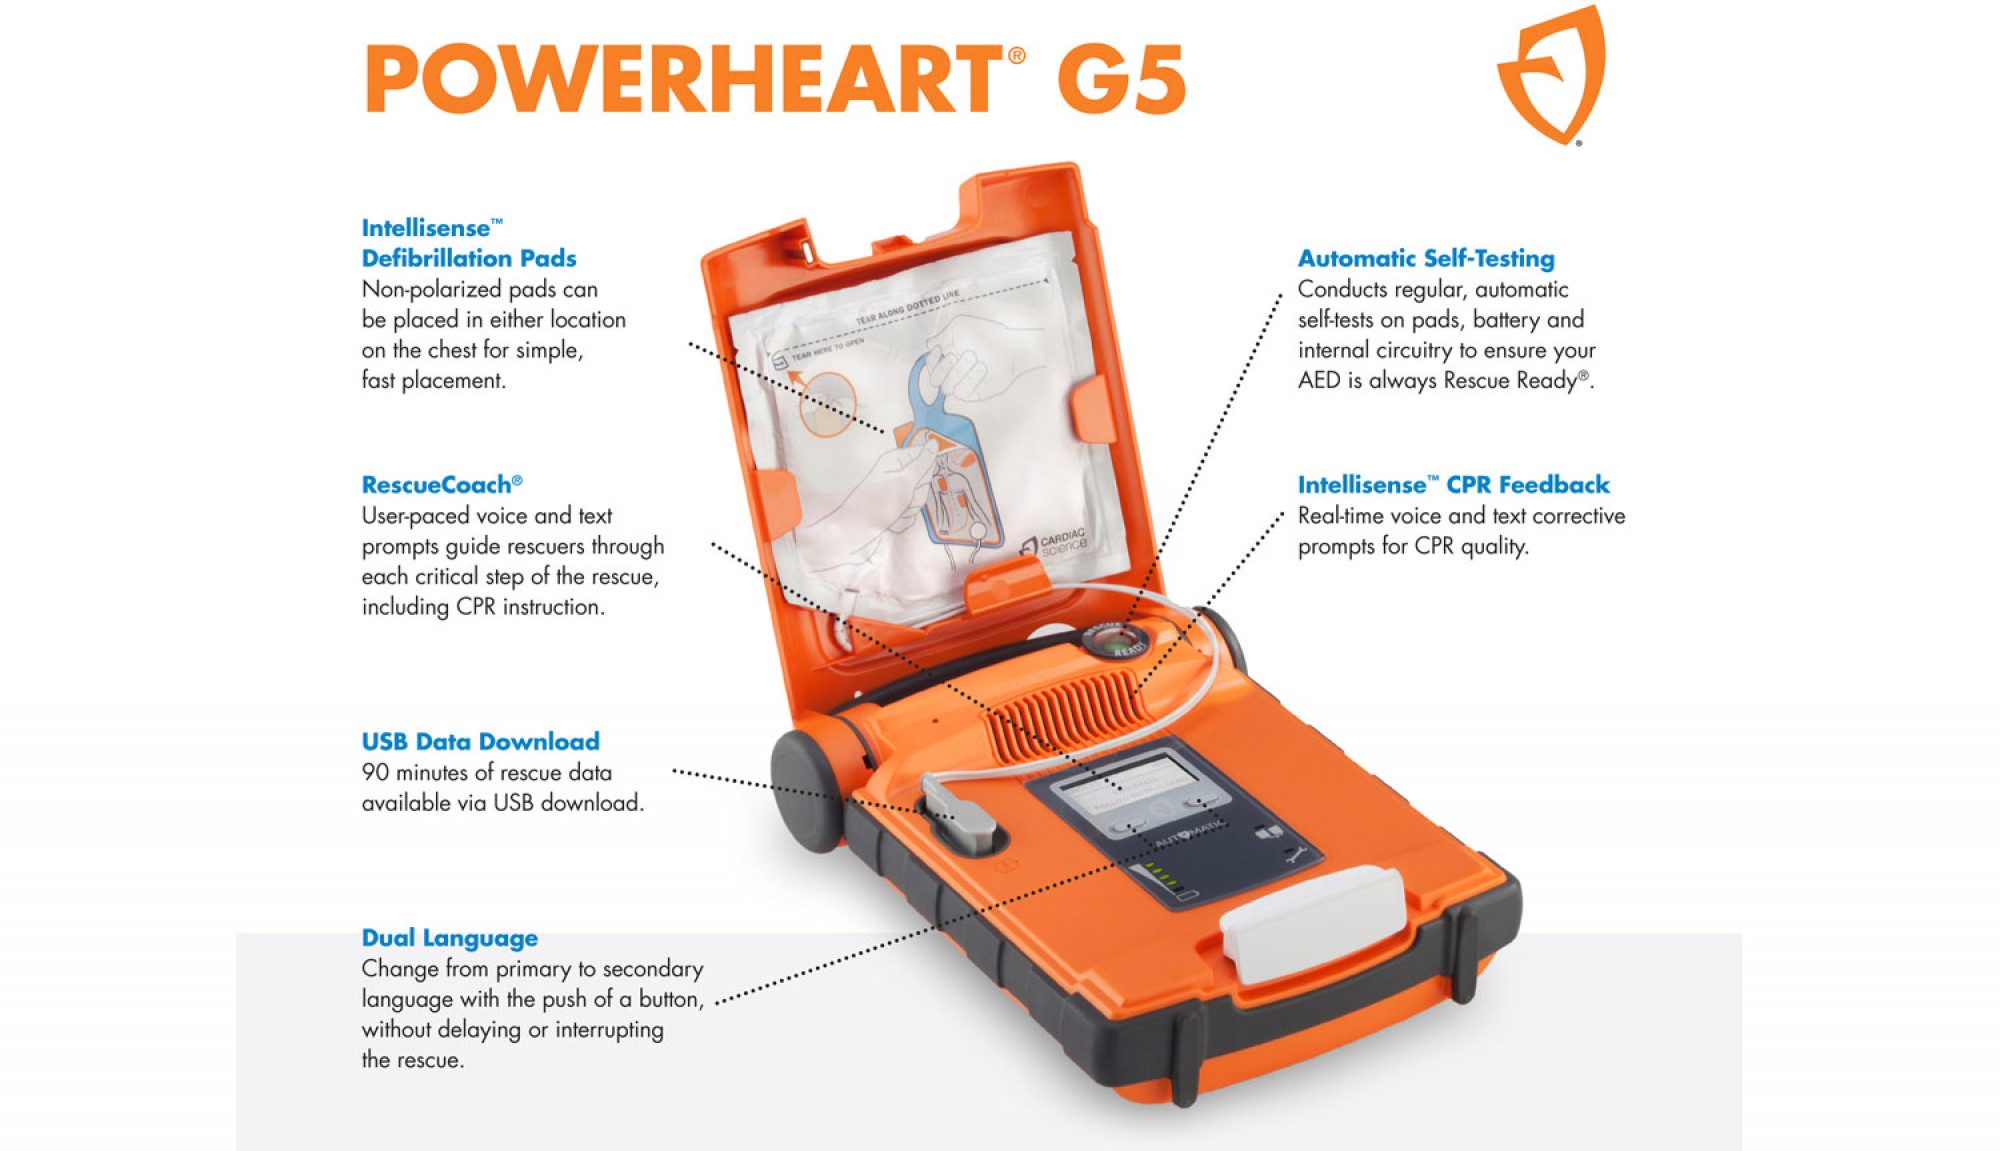 Powerheart G5 - Technical Specifications